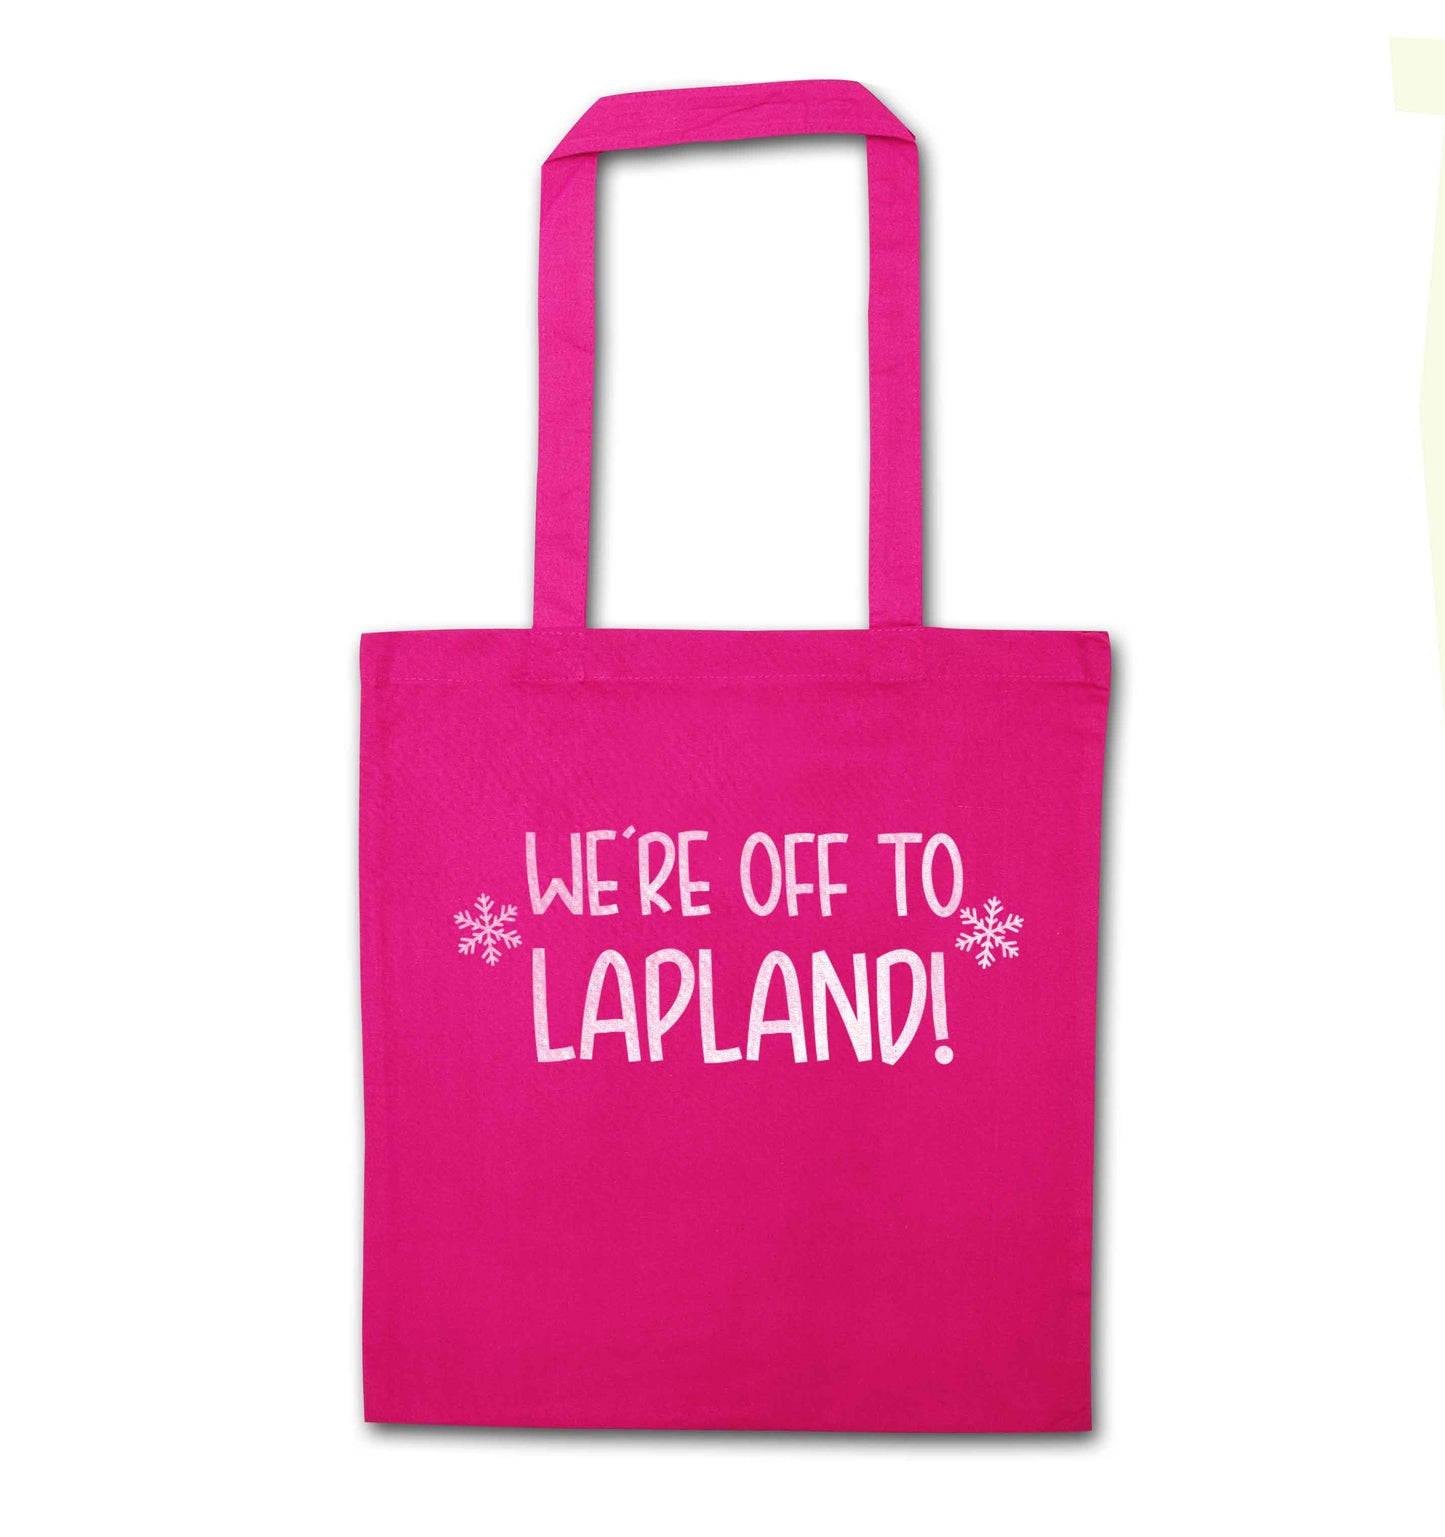 We're off to Lapland pink tote bag